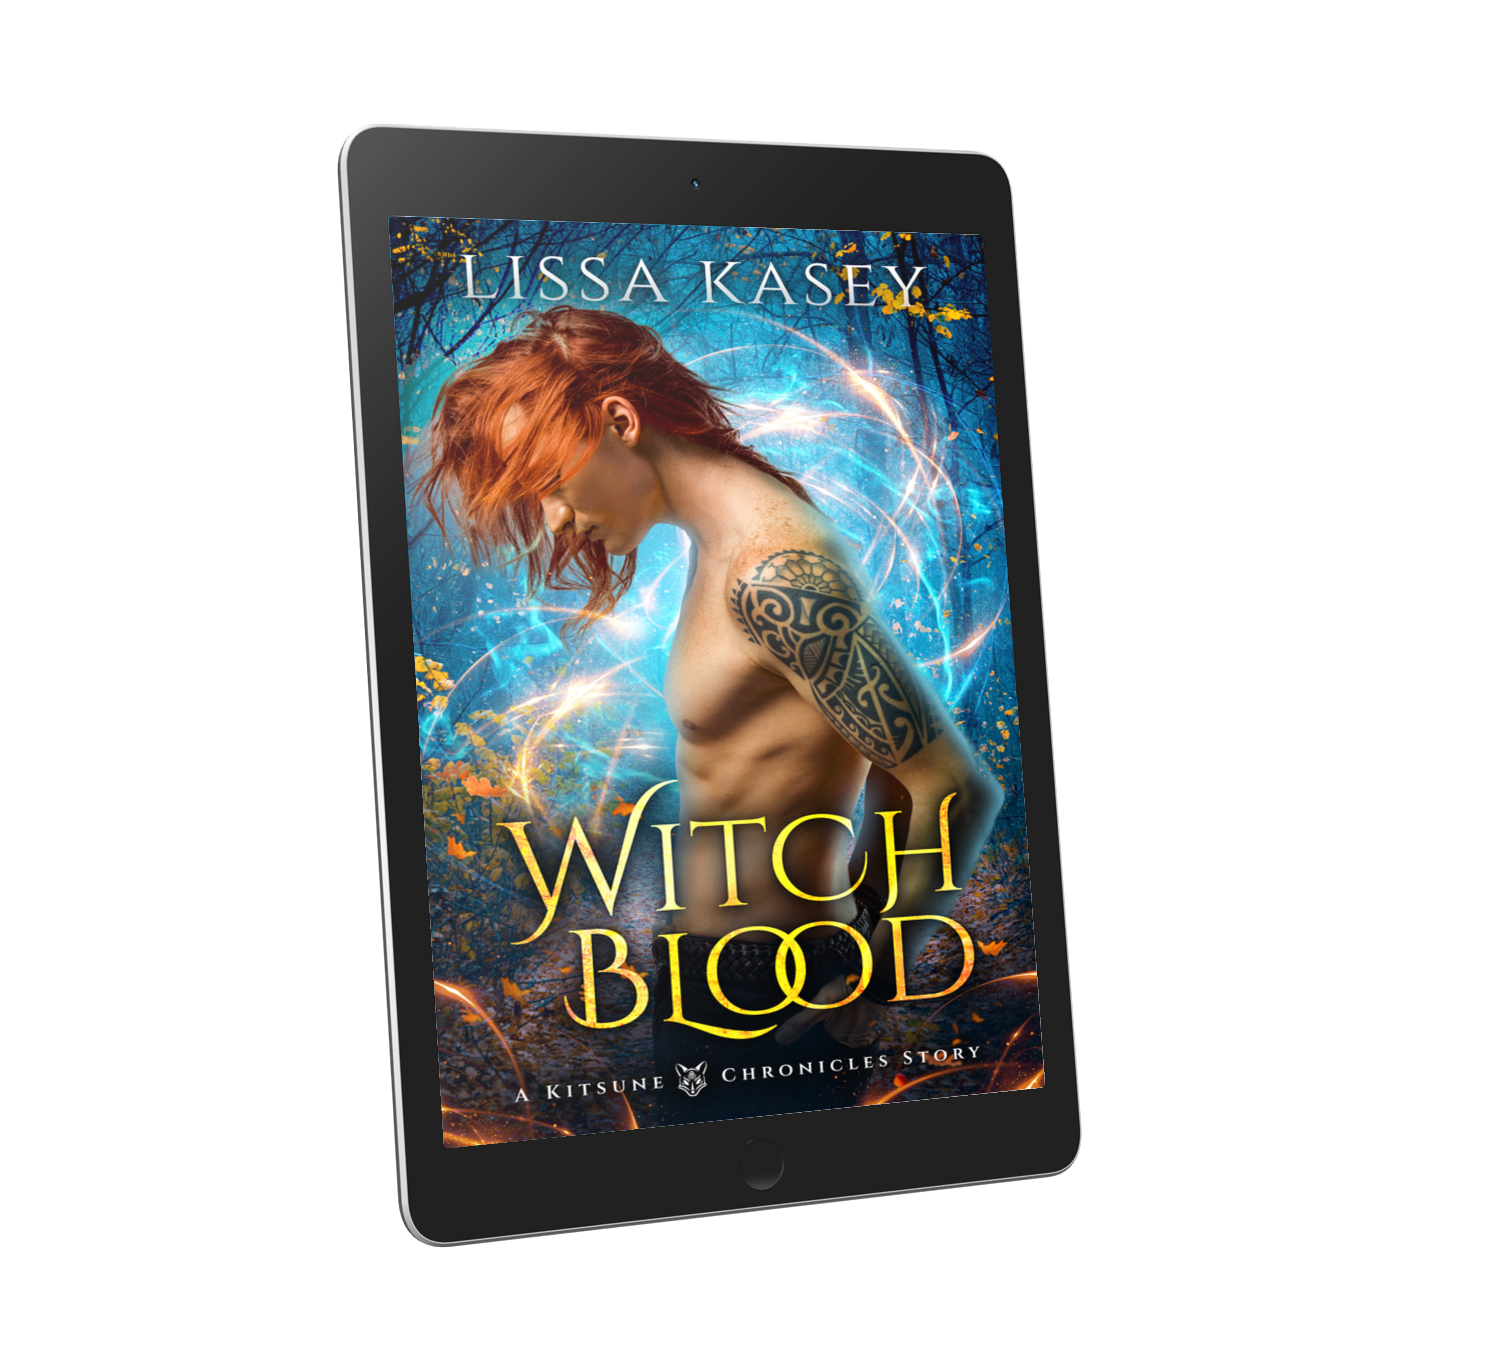 Witchblood by Lissa Kasey A kitsune chronicles Story Book One